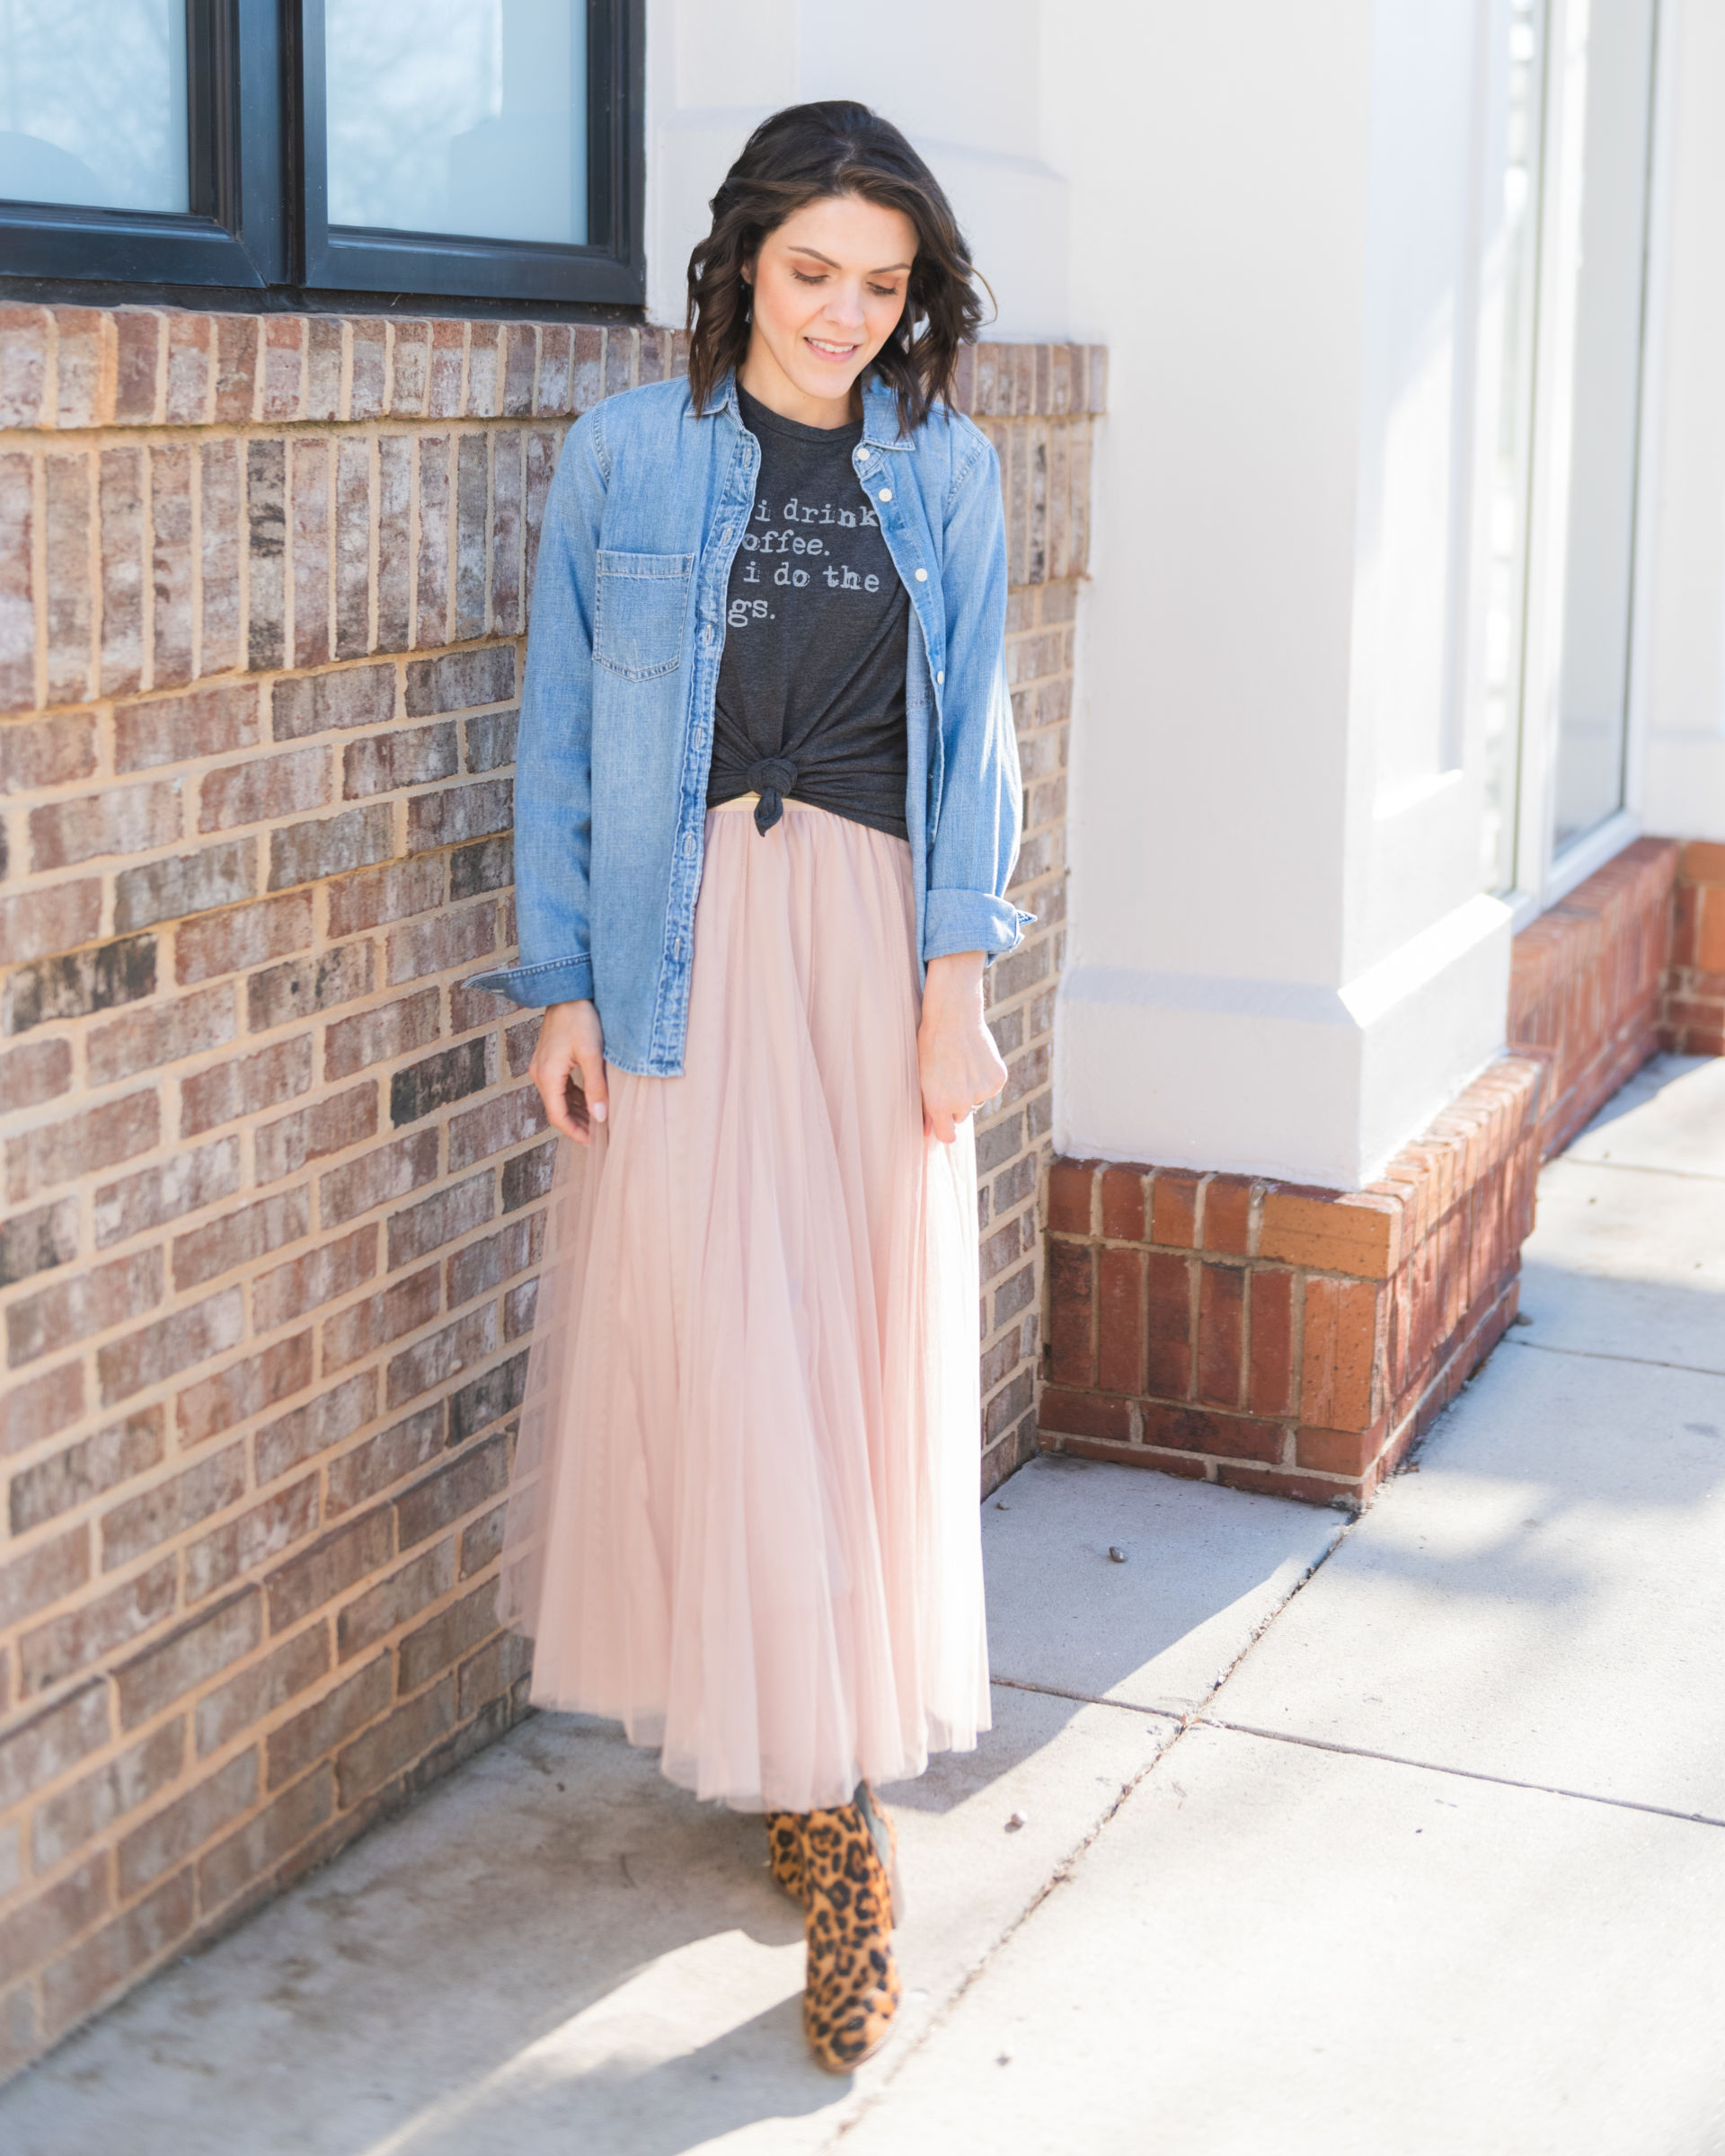 3 ways to style a tulle skirt - the Sarah Stories